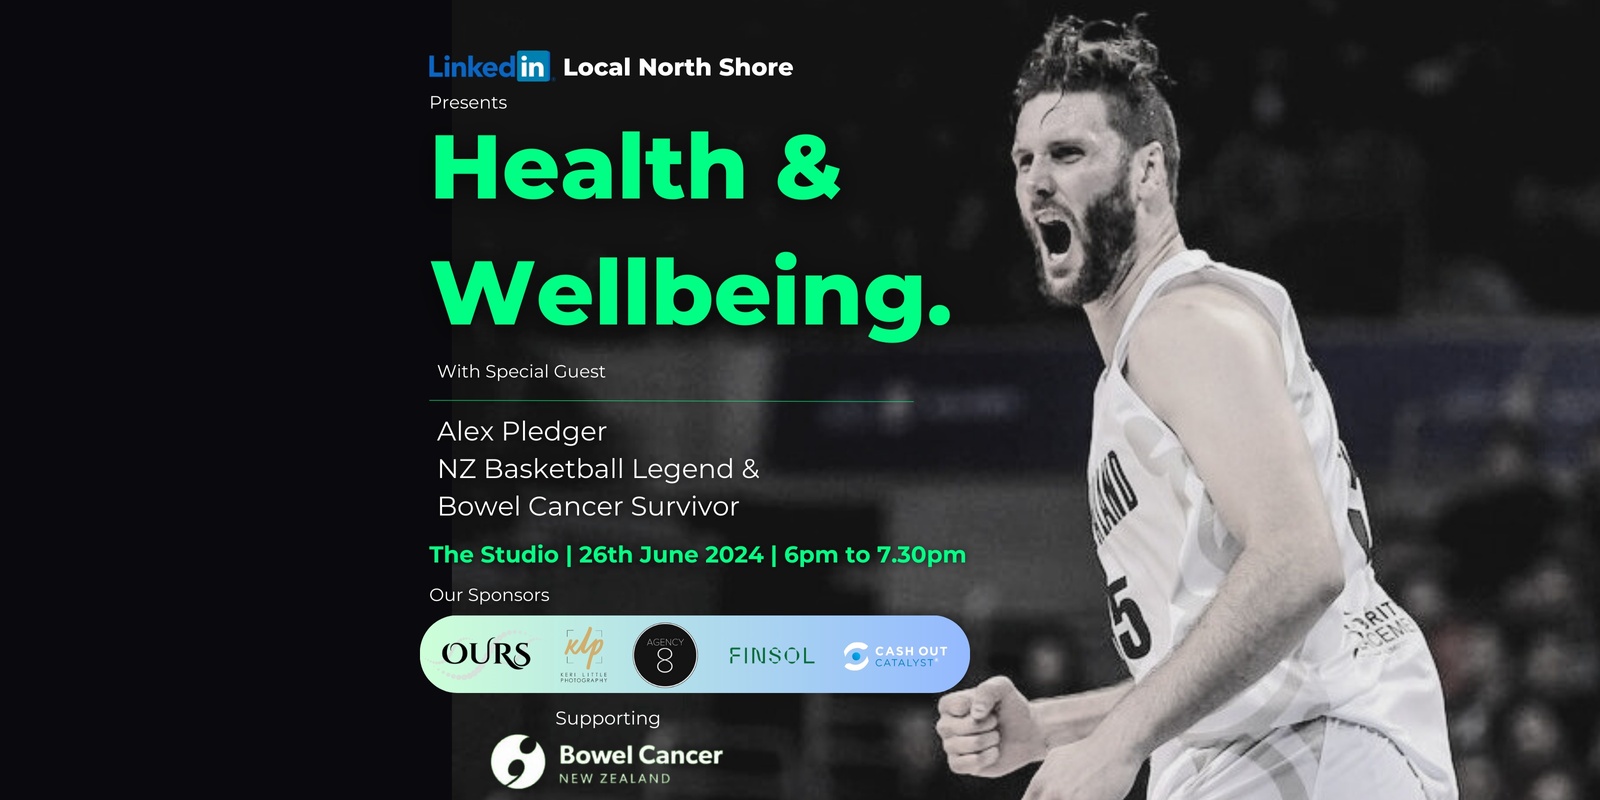 Banner image for LinkedIn Local Northshore Presents "Health and Wellbeing"